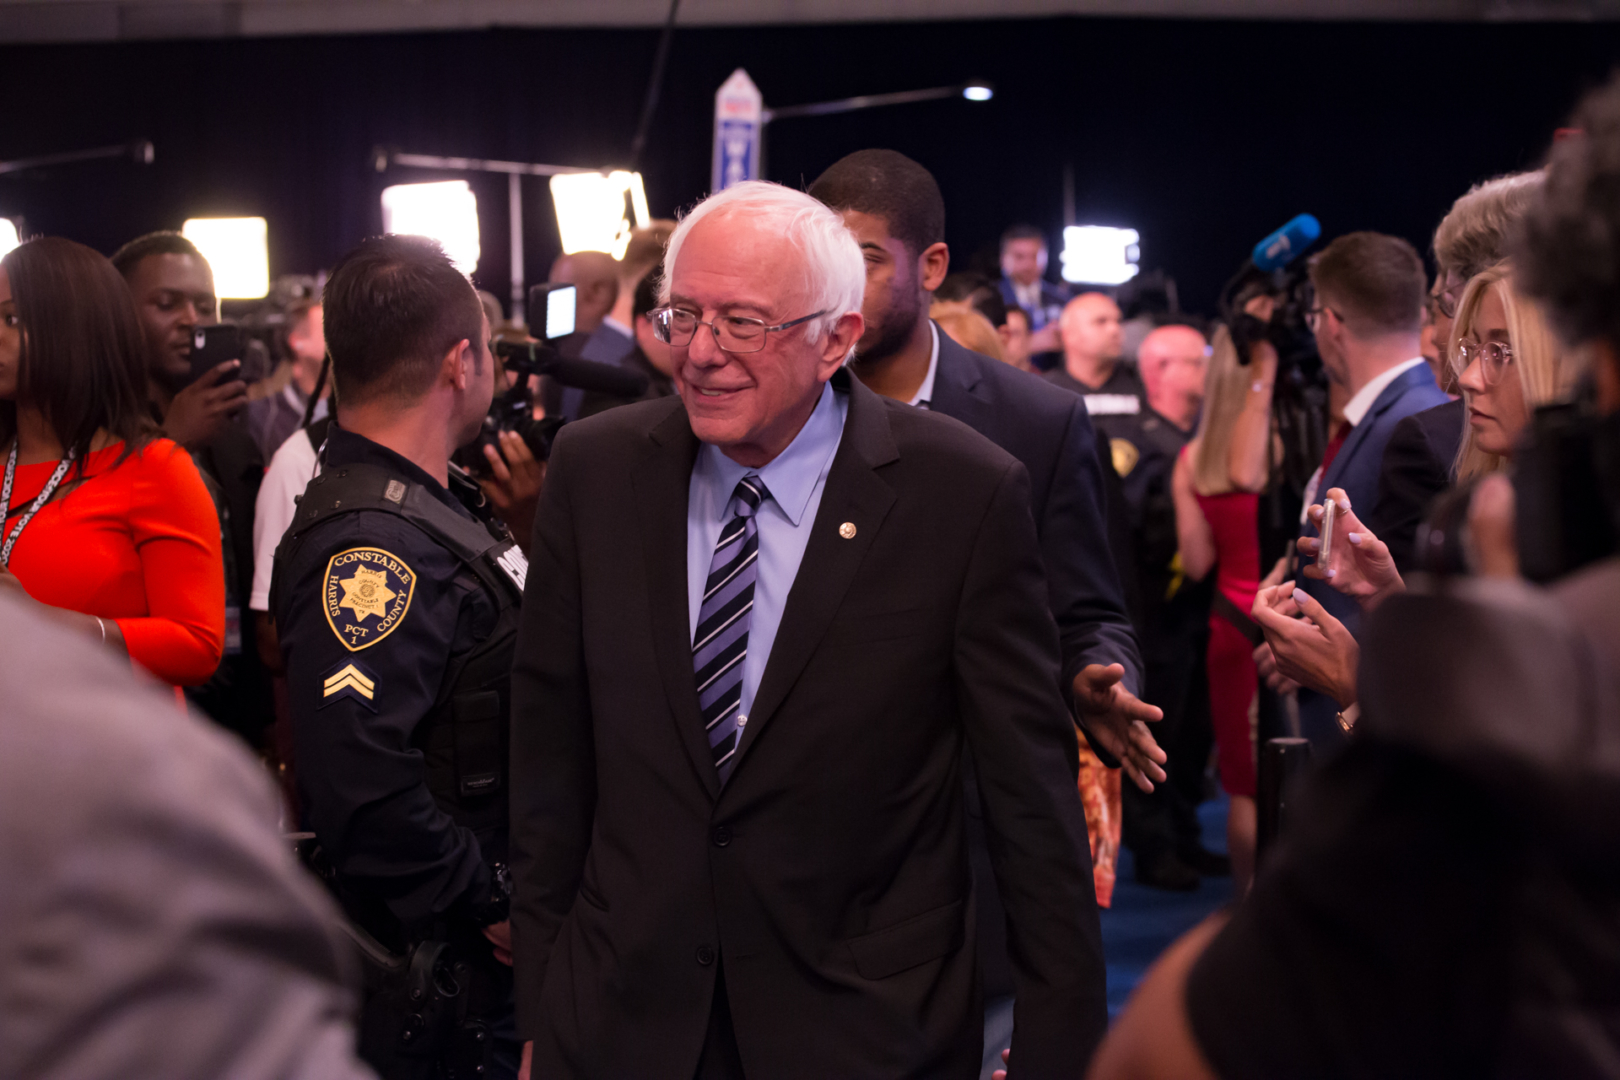 2020 presidential candidate Bernie Sanders will be at UH for a campaign rally 1 p.m. on Sunday in Fertitta Center. Sanders will stop for rallies in El Paso, San Antonio and Austin following his visit to the UH campus. | Trevor Nolley/The Cougar